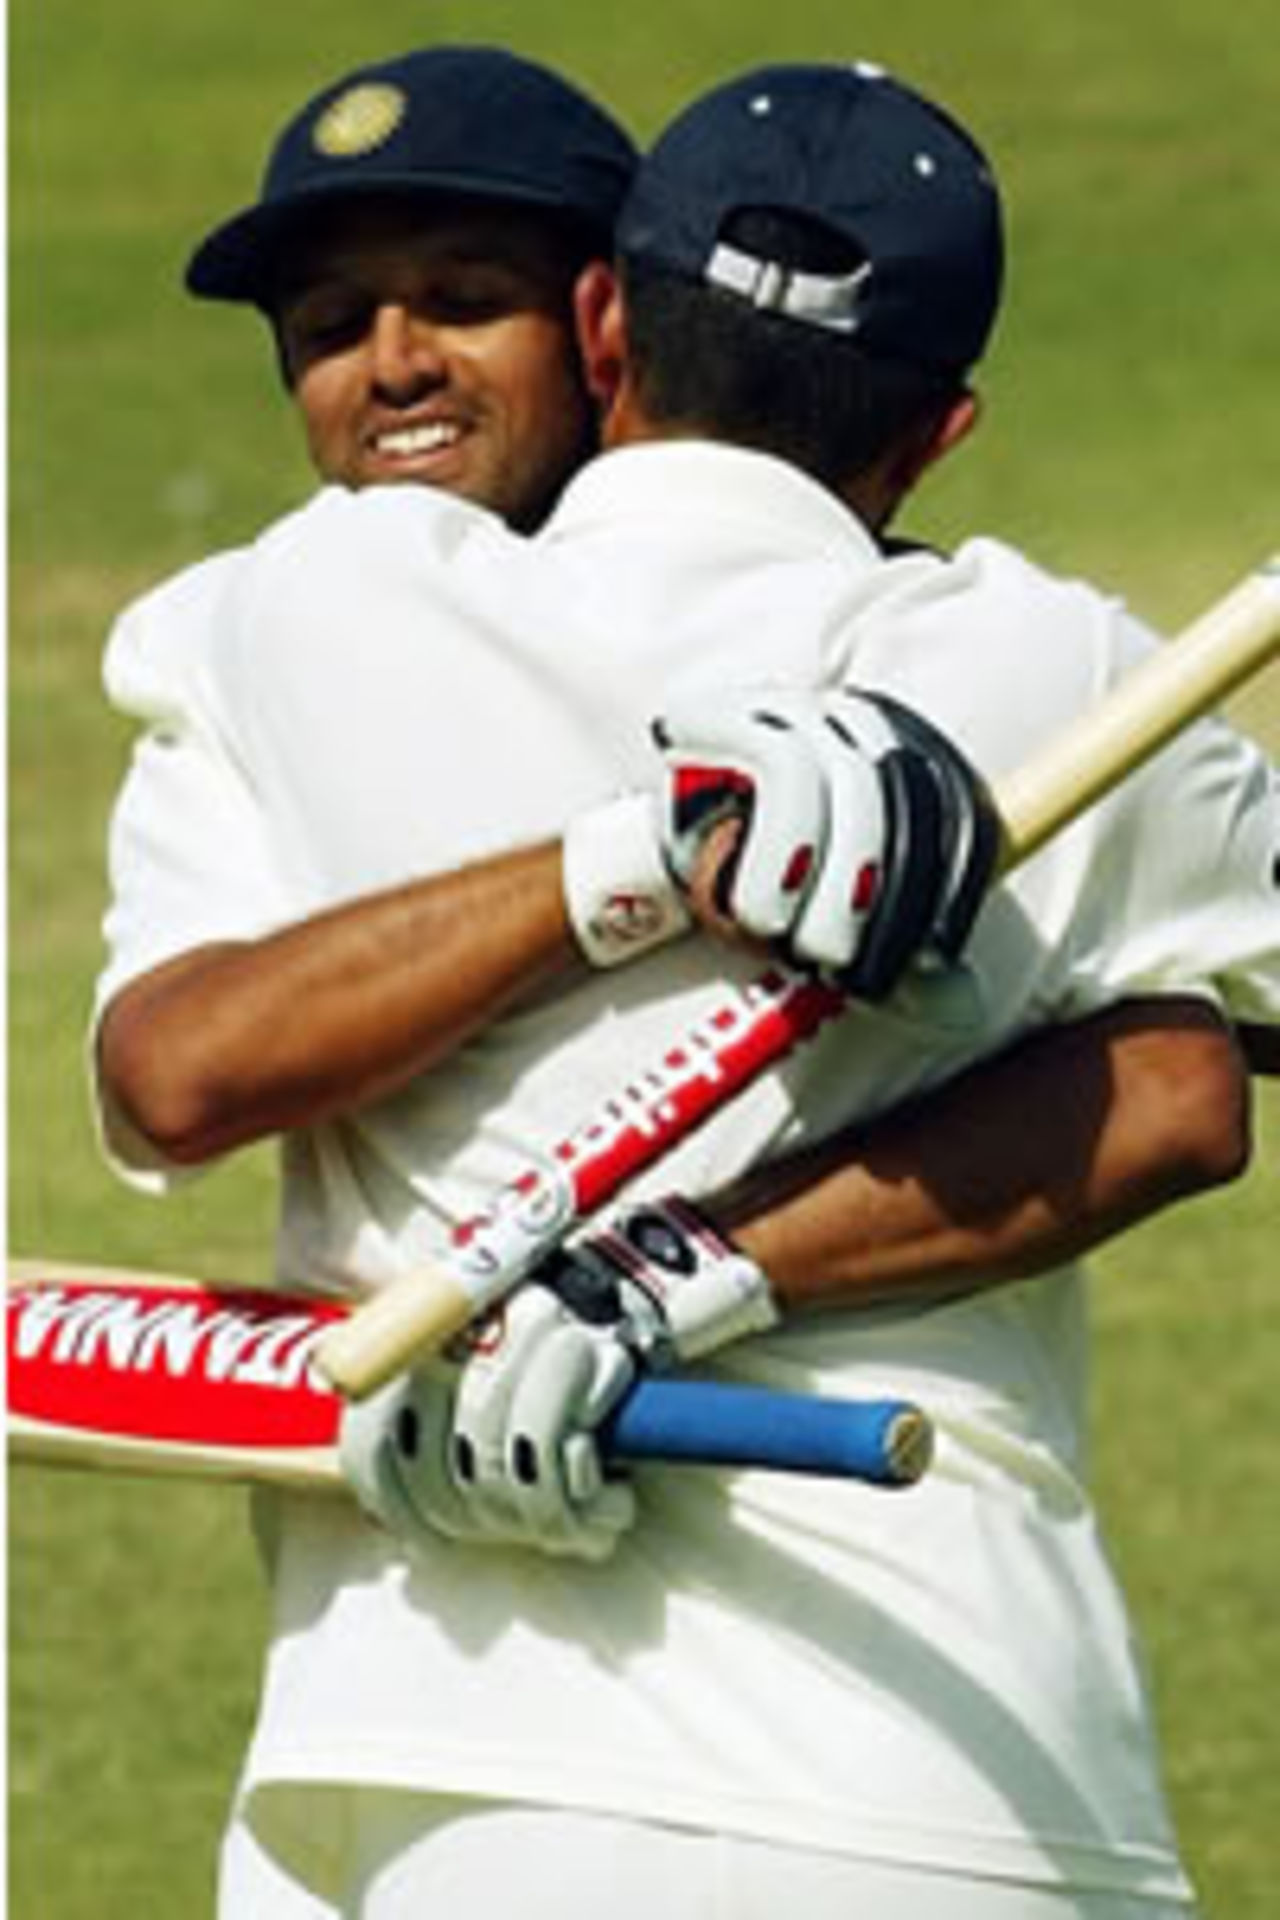 India batsman Rahul Dravid (L) is congratulated by captain Sourav Ganguly (R) after defeating Australia on the final day of the second Test Match being played in Adelaide 16 December 2003.